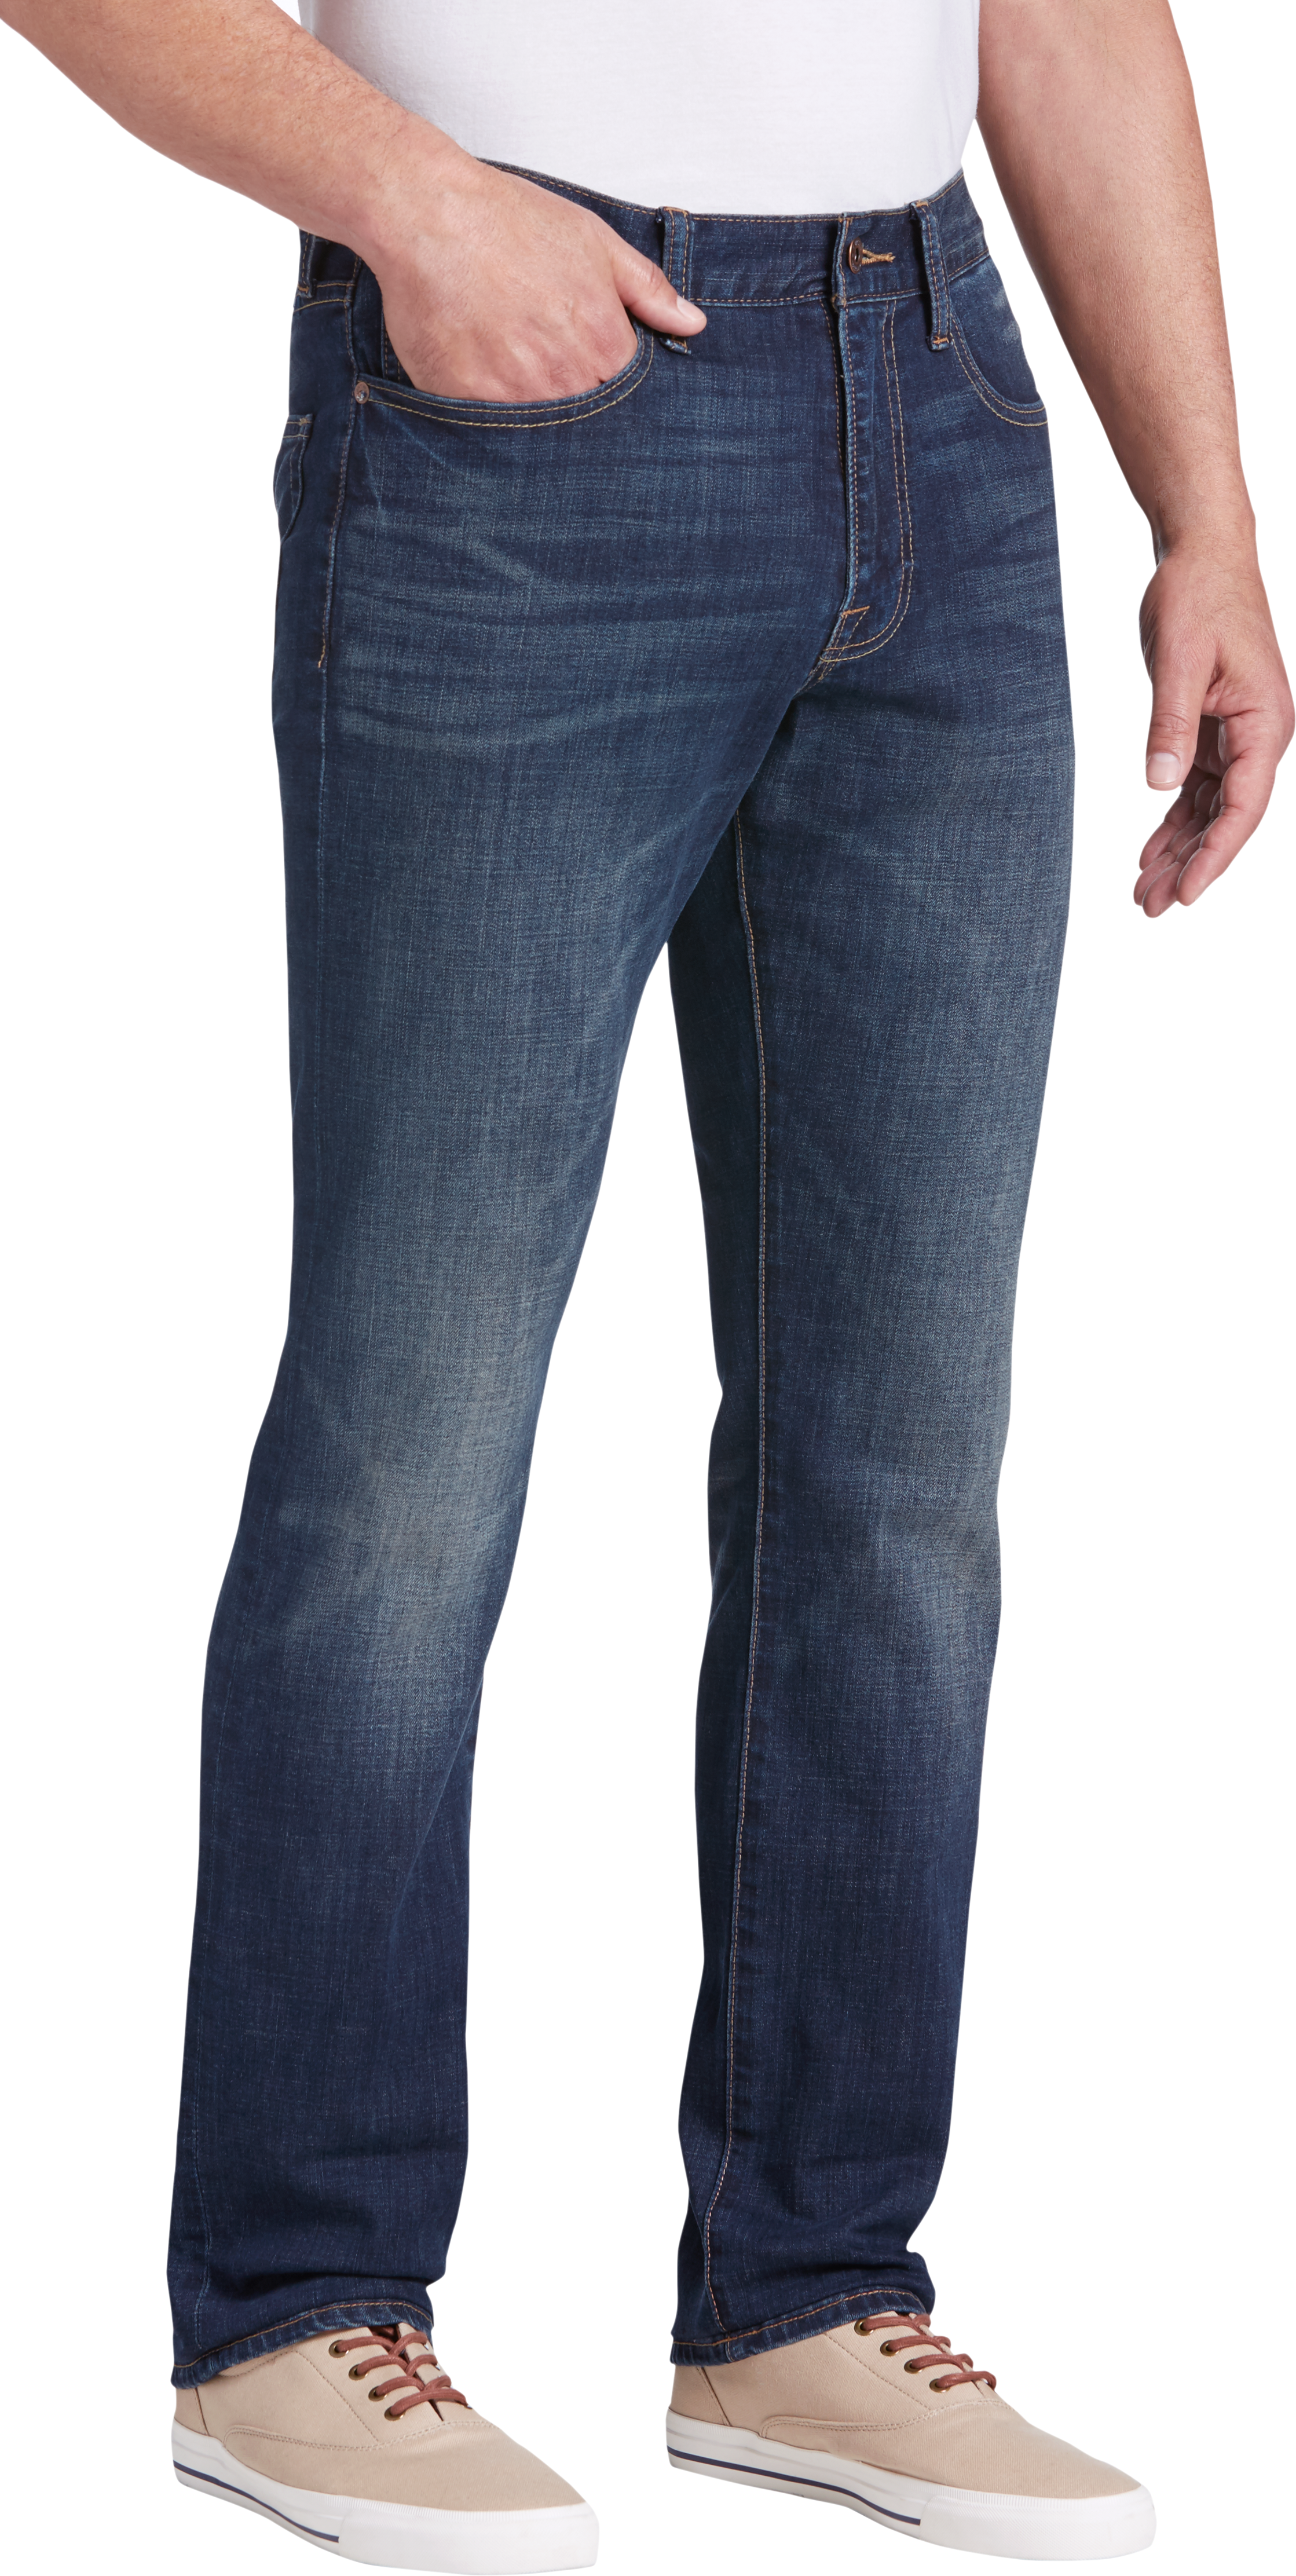 lucky jeans men's athletic fit